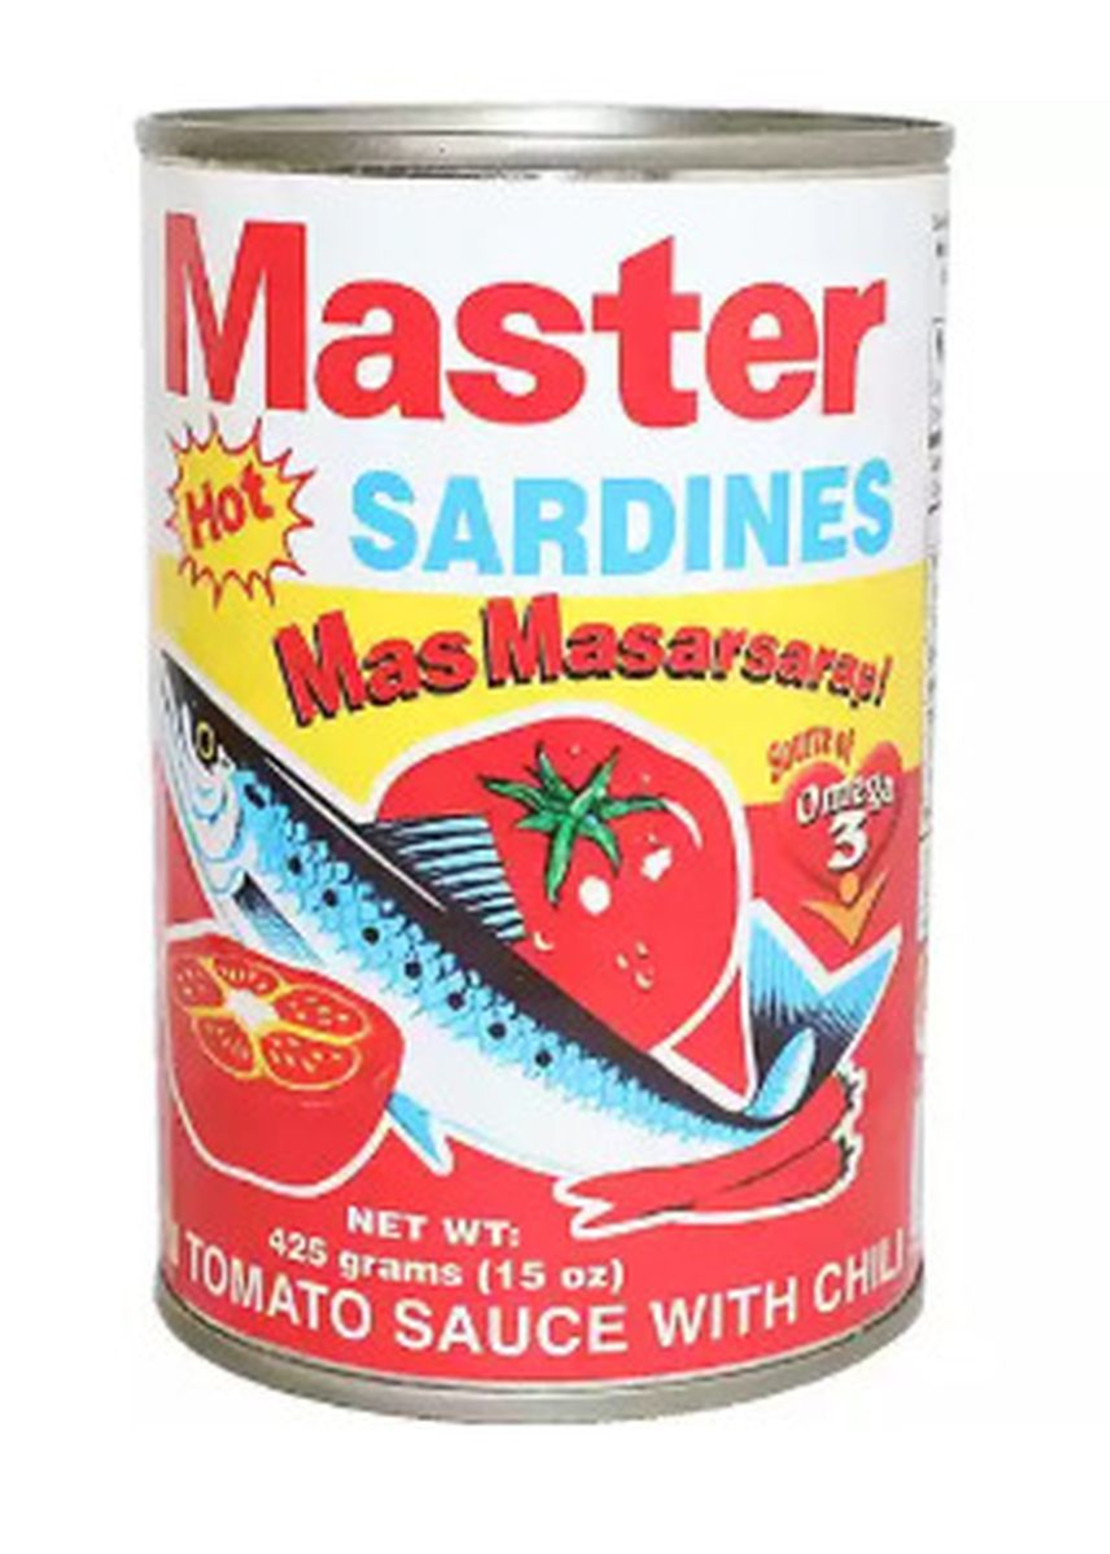 Master sardines  in tomato sauce with chilli 425grms.